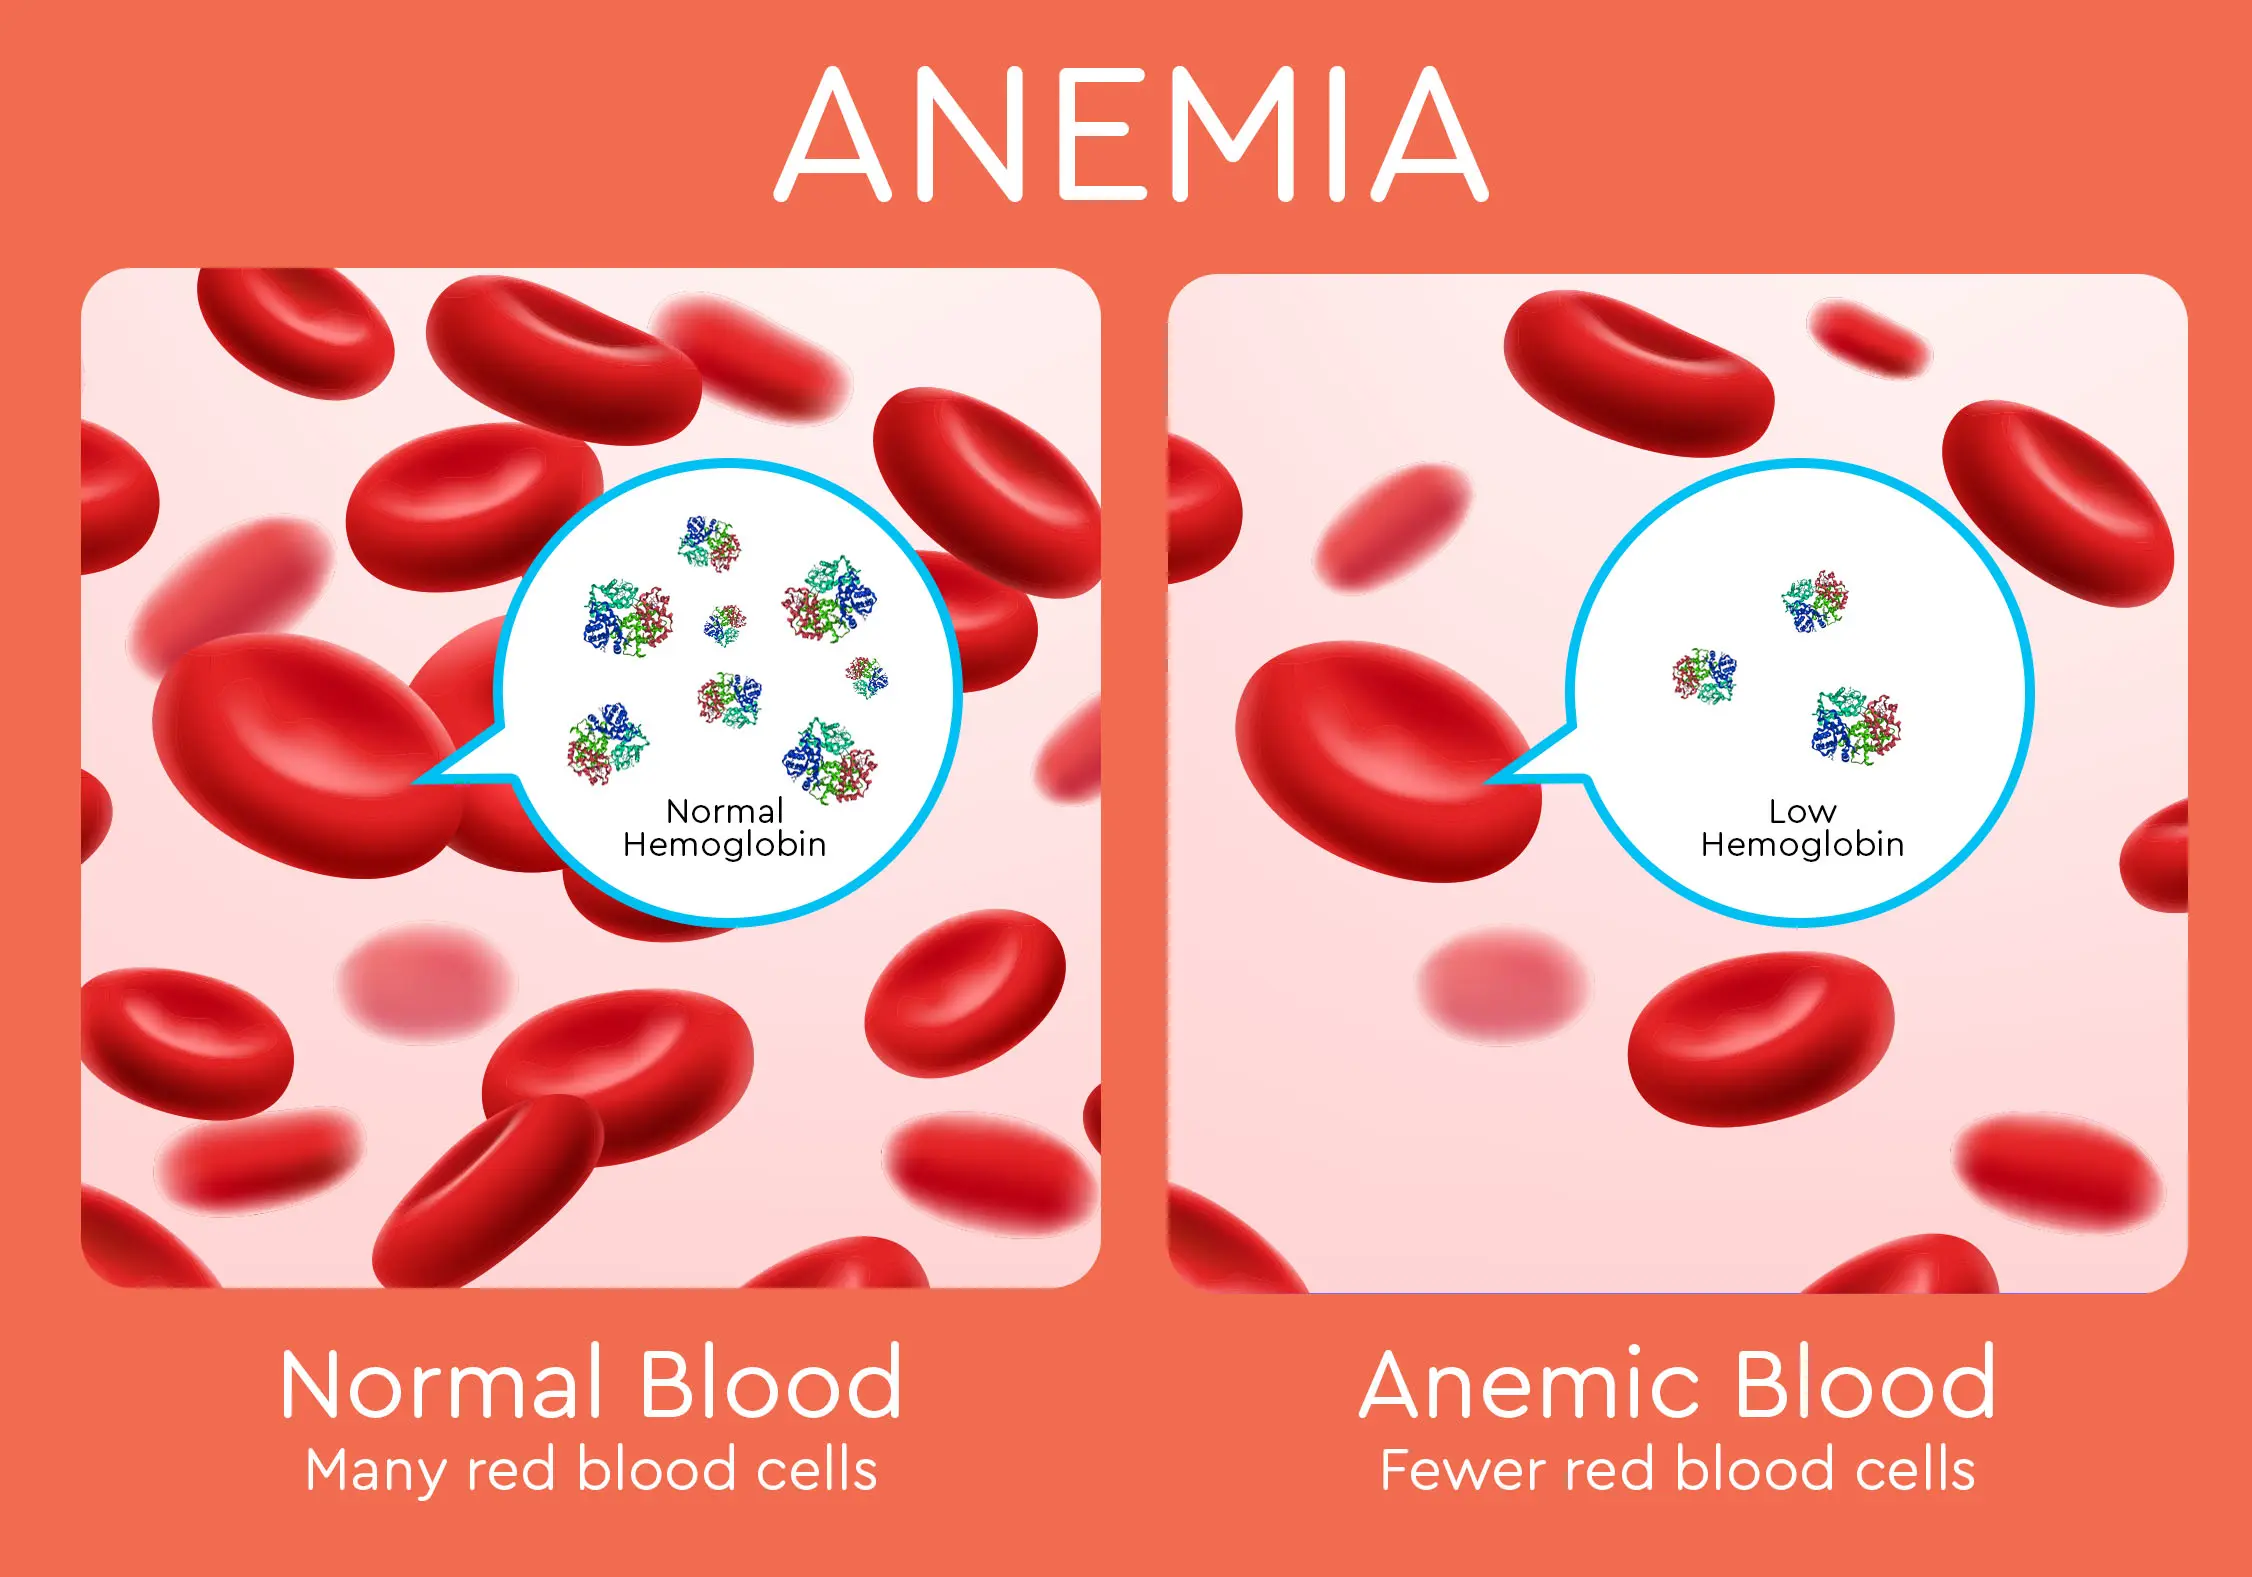 normal blood graphic showing many red blood cells, next to anemic blood graphic showing fewer red blood cells